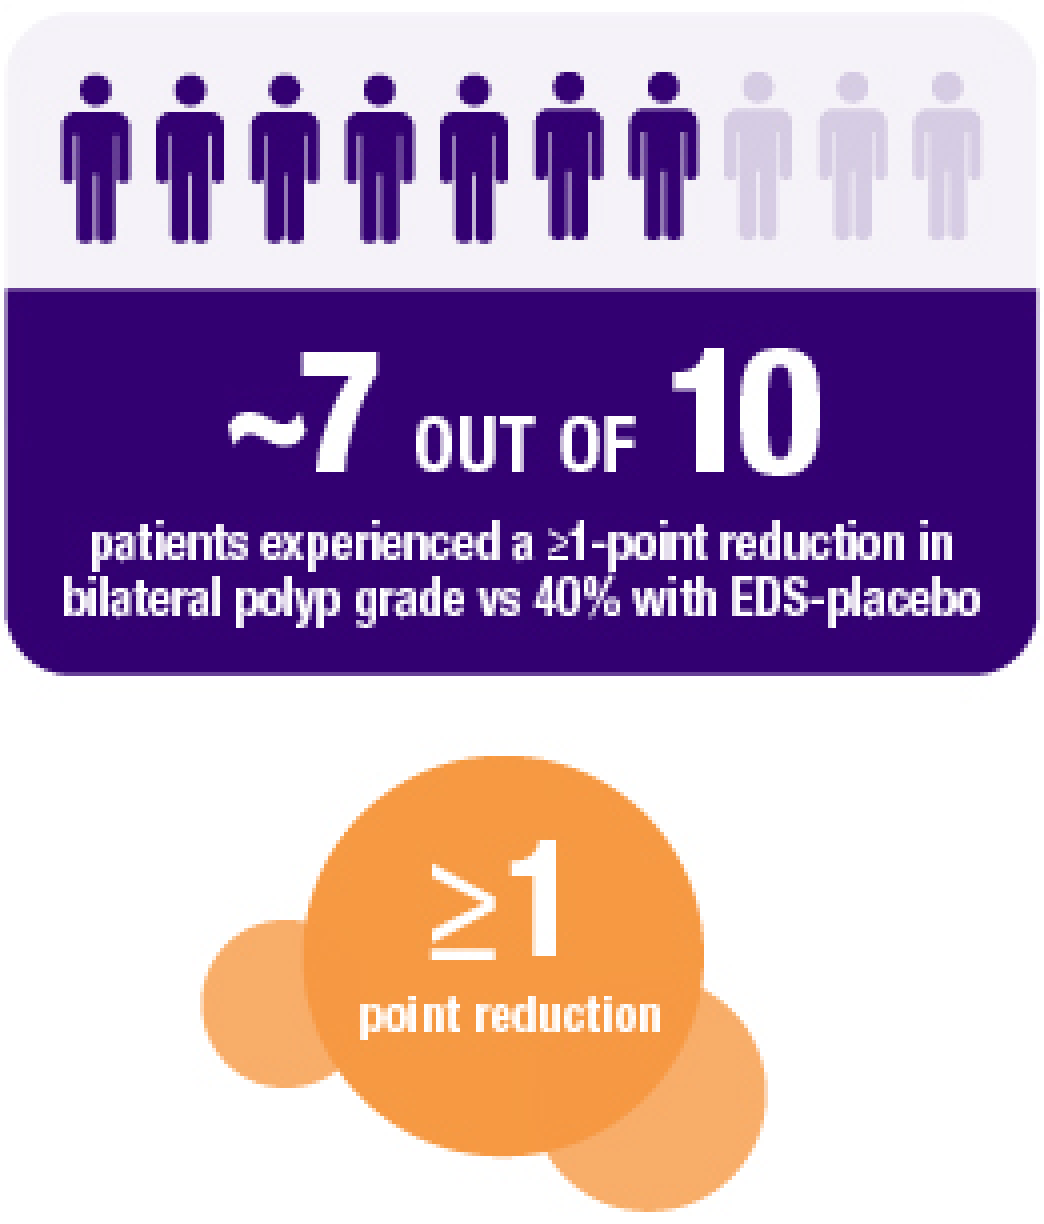 Graphic of about 7 out of 10 patients experienced a ≥1-point reduction in bilateral polyp grade vs 40% with EDS-placebo